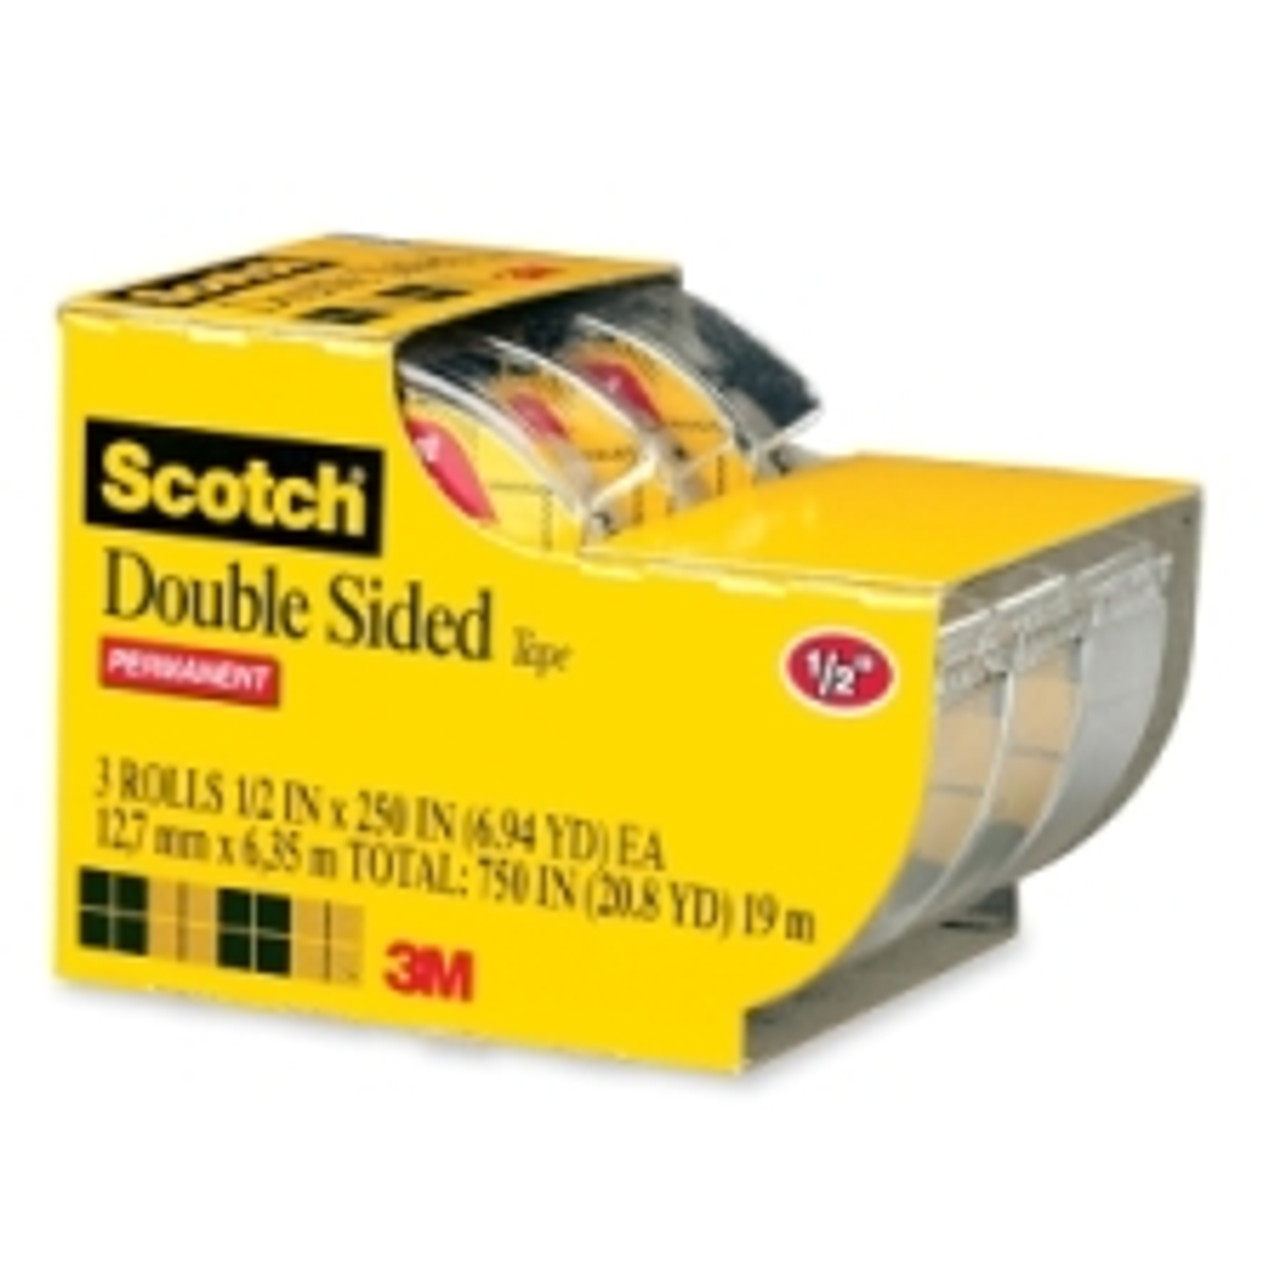 Scotch Double Sided Tape with Dispenser - 1 - LegalSupply